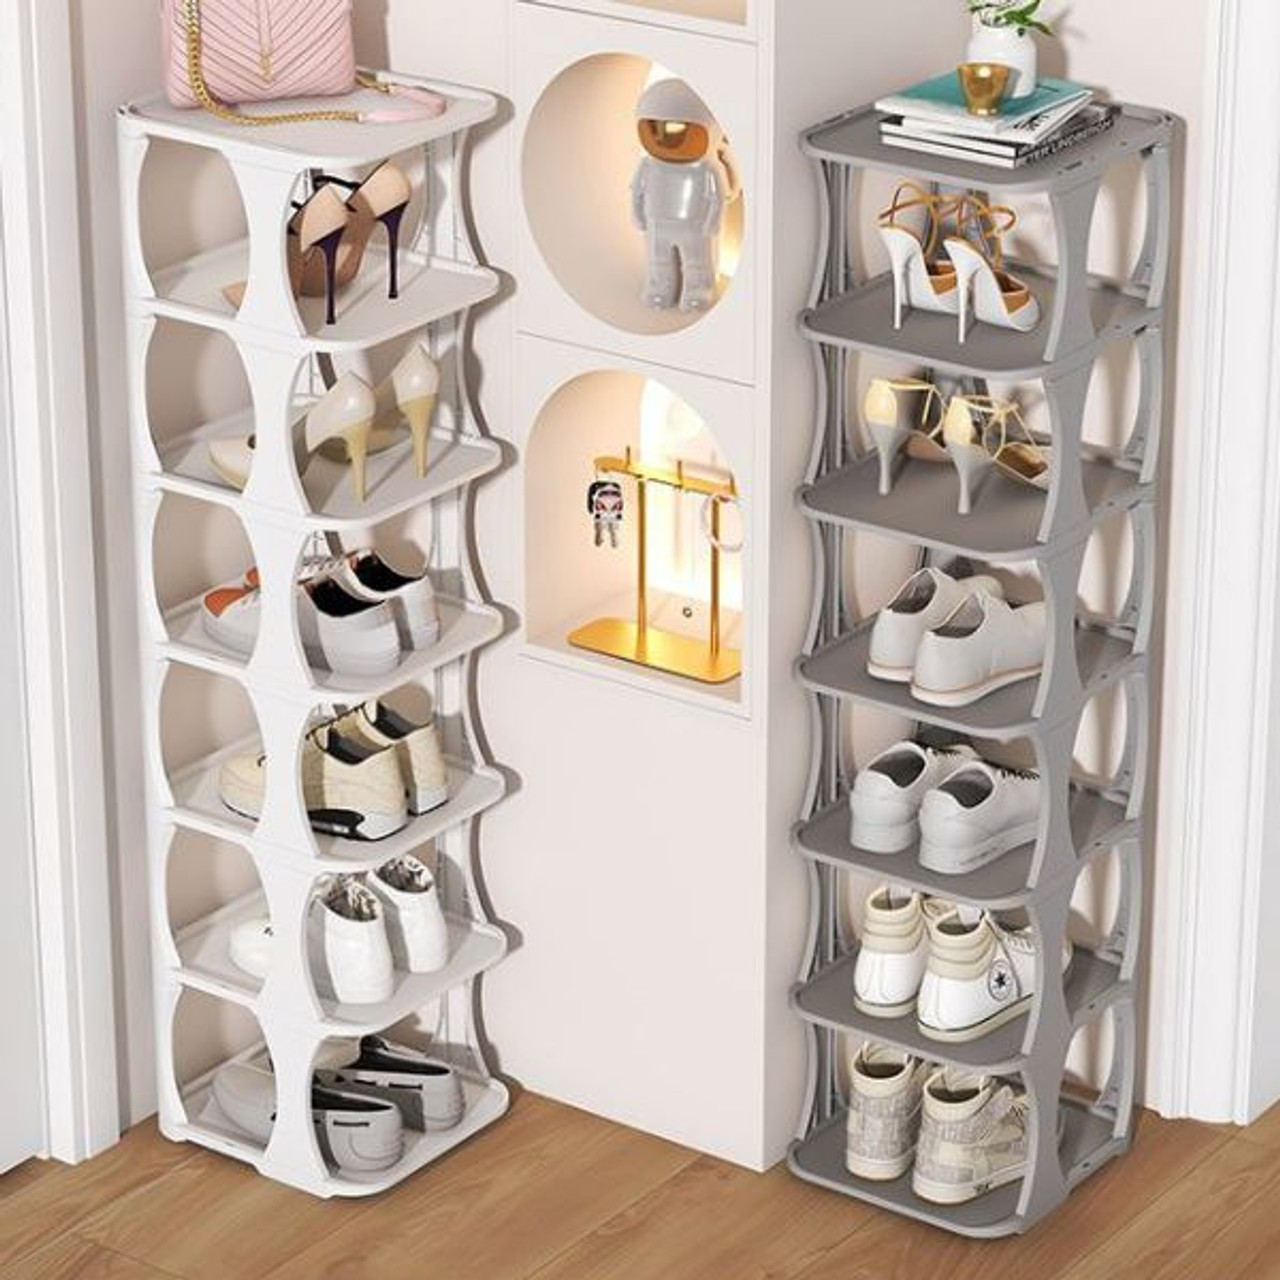 Shoe Organizer Rack 4 Layers – All Variety Store